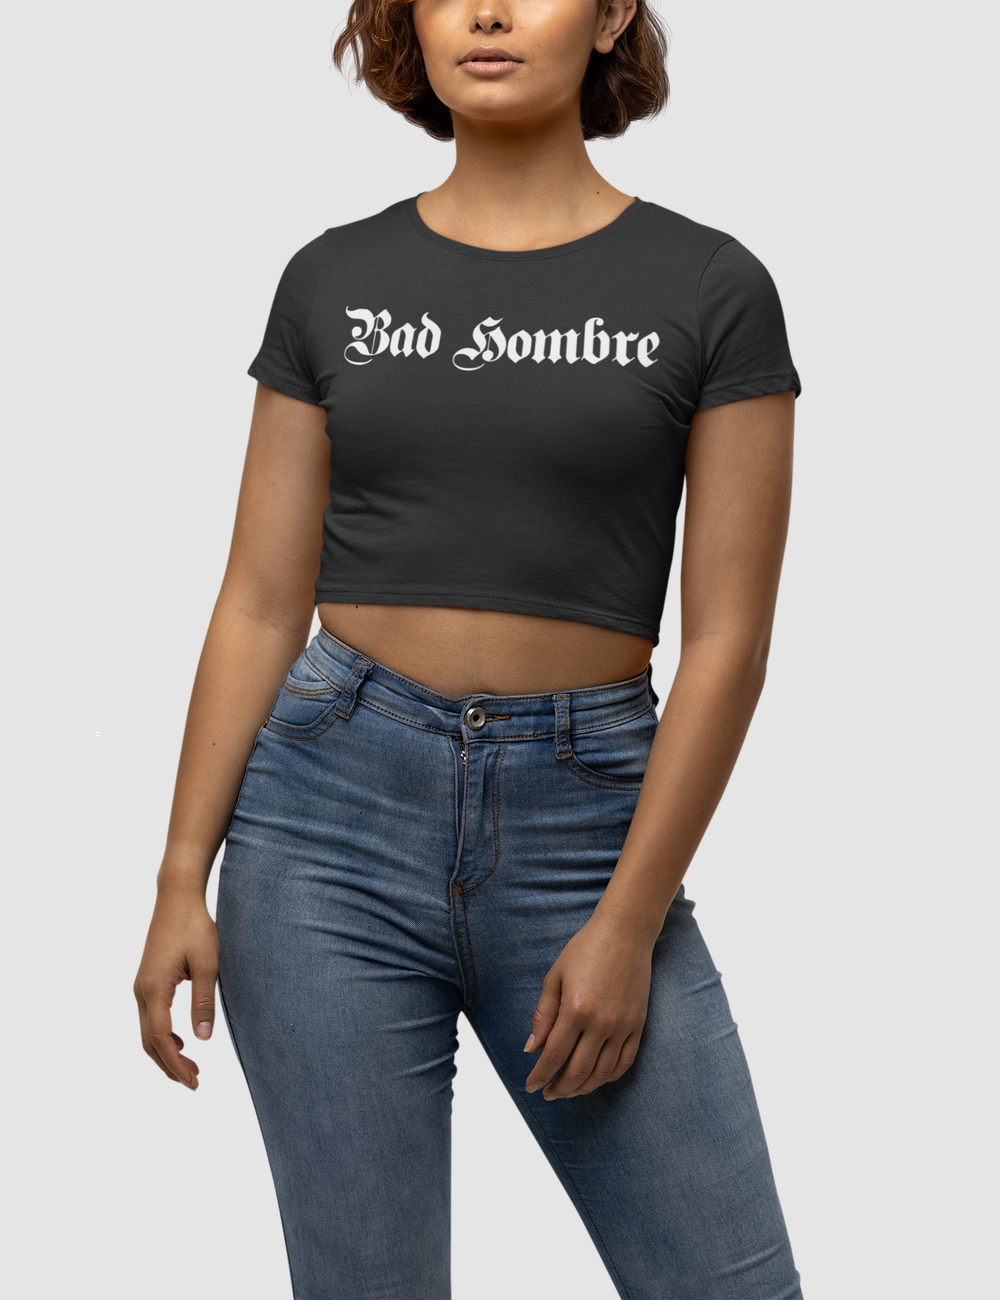 Bad Hombre | Women's Fitted Crop Top T-Shirt OniTakai